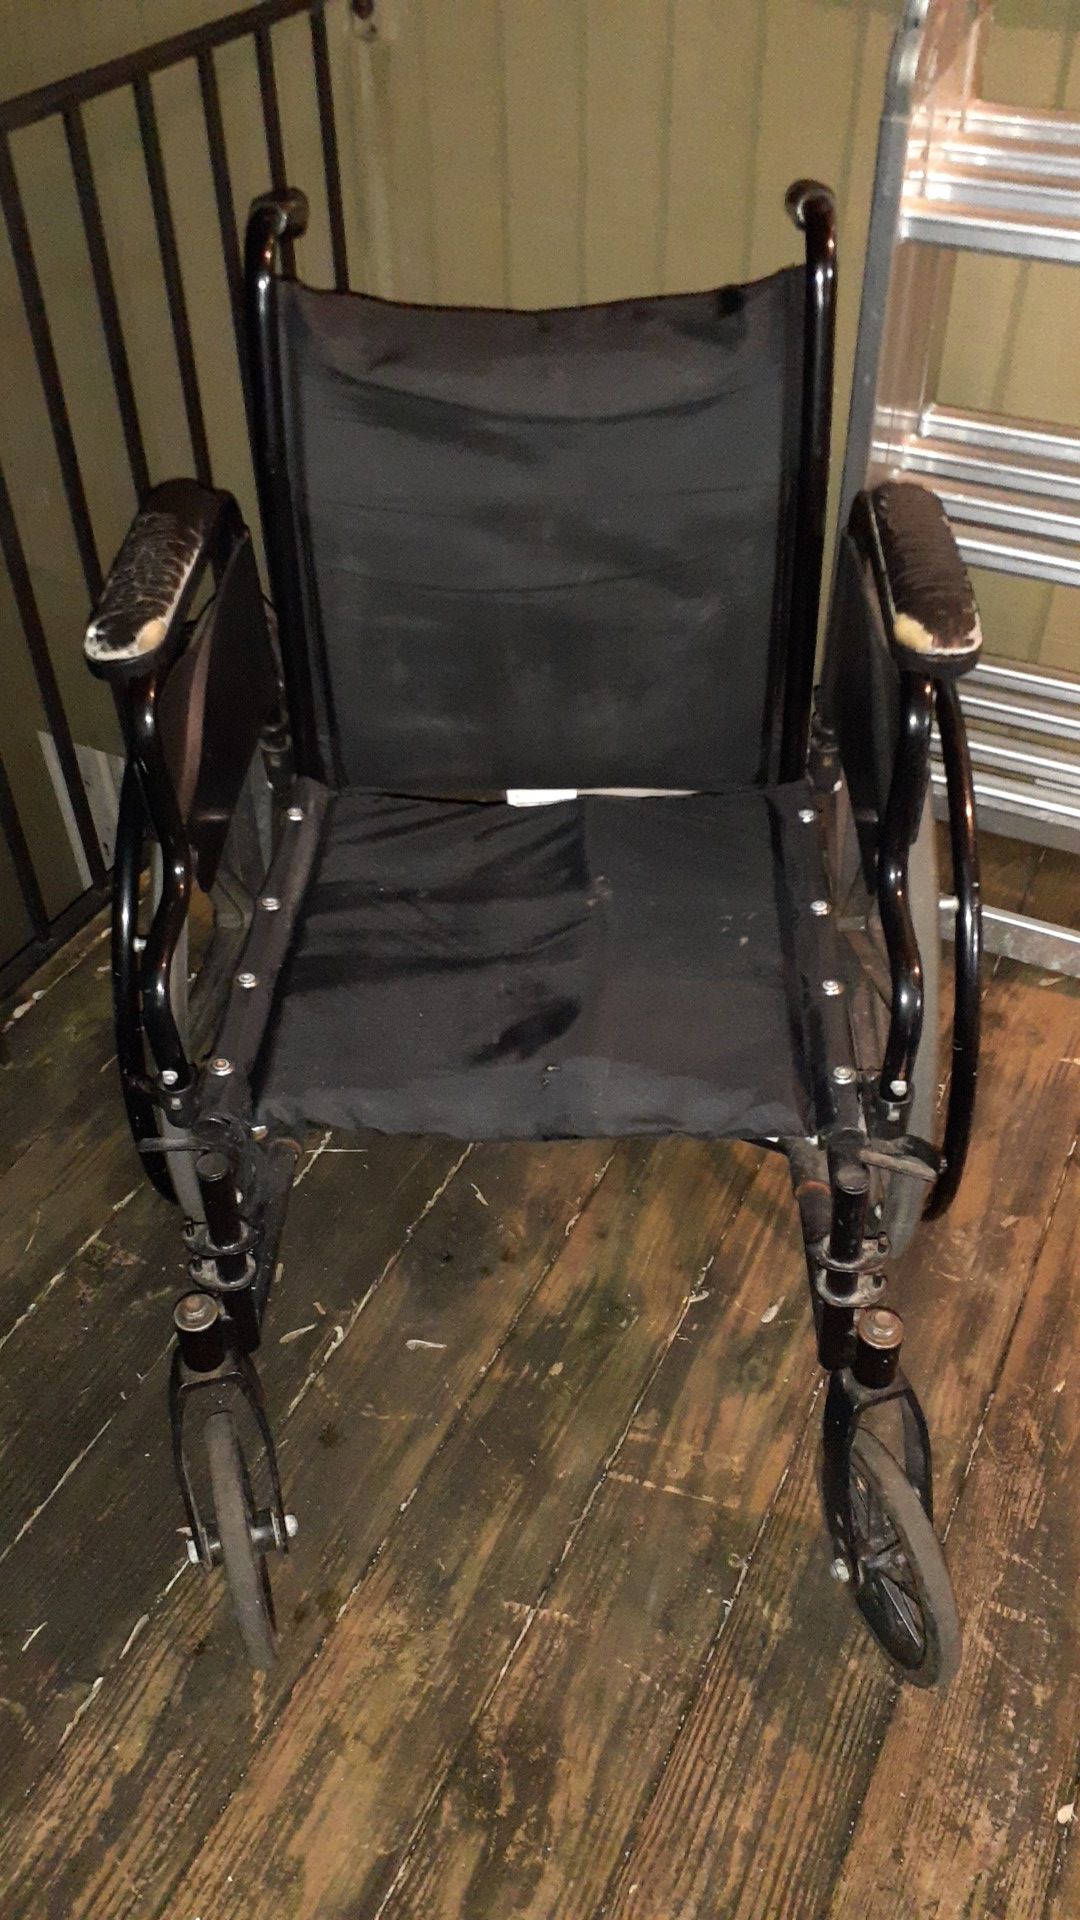 INVACARE TRACER SX5 wheel chair 18"